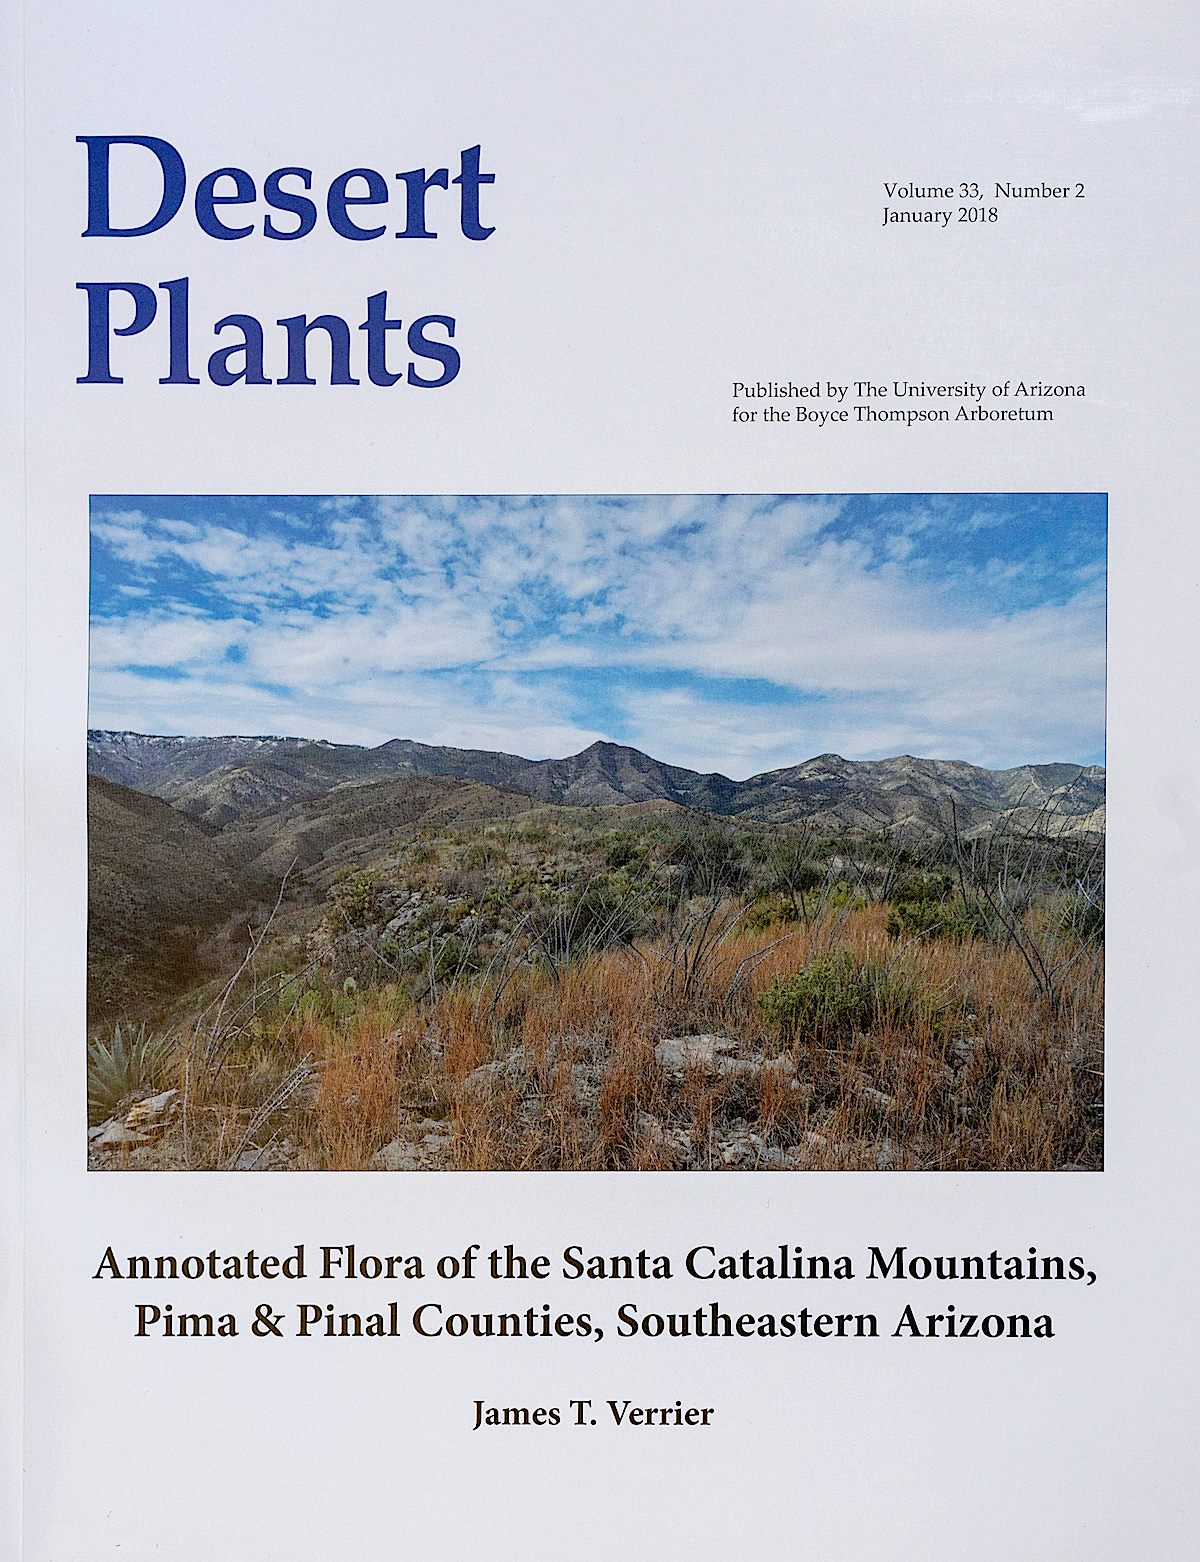 Desert Plants - Annotated Flora of the Santa Catalina Mountains, Pima & Pinal Counties, Southeastern Arizona, James T. Verrier. June 2018.